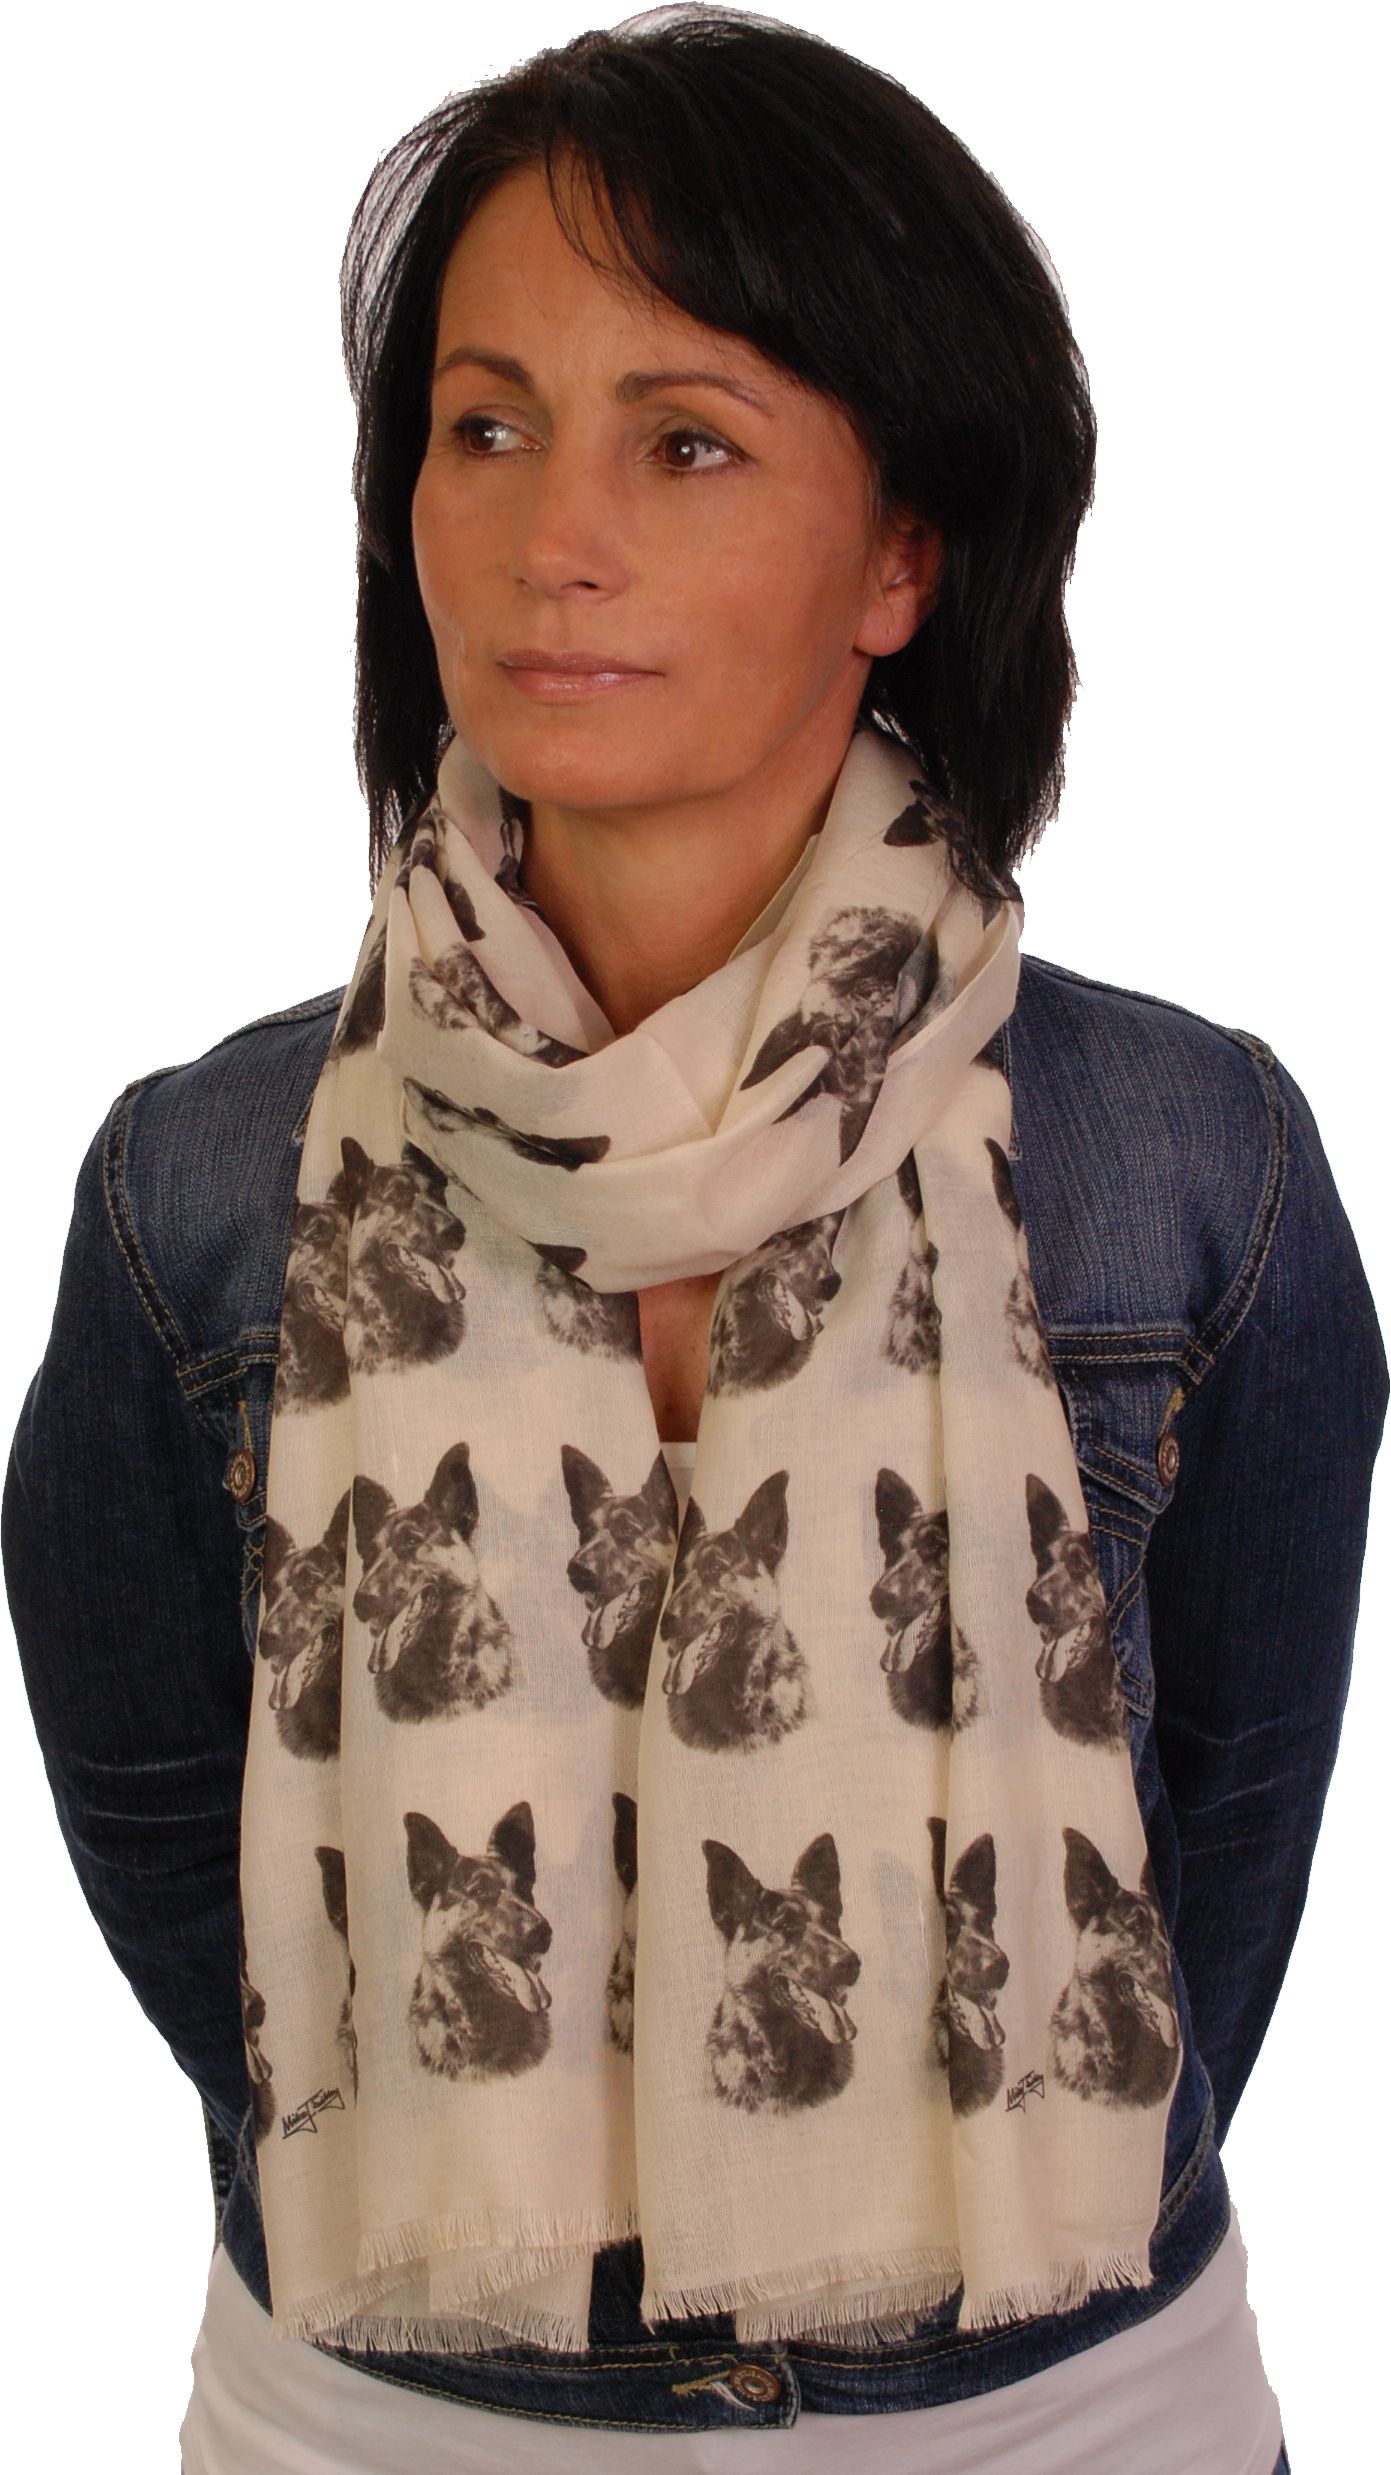 Mike Sibley German Shepherd Open Mouth licensed design ladies fashion scarf